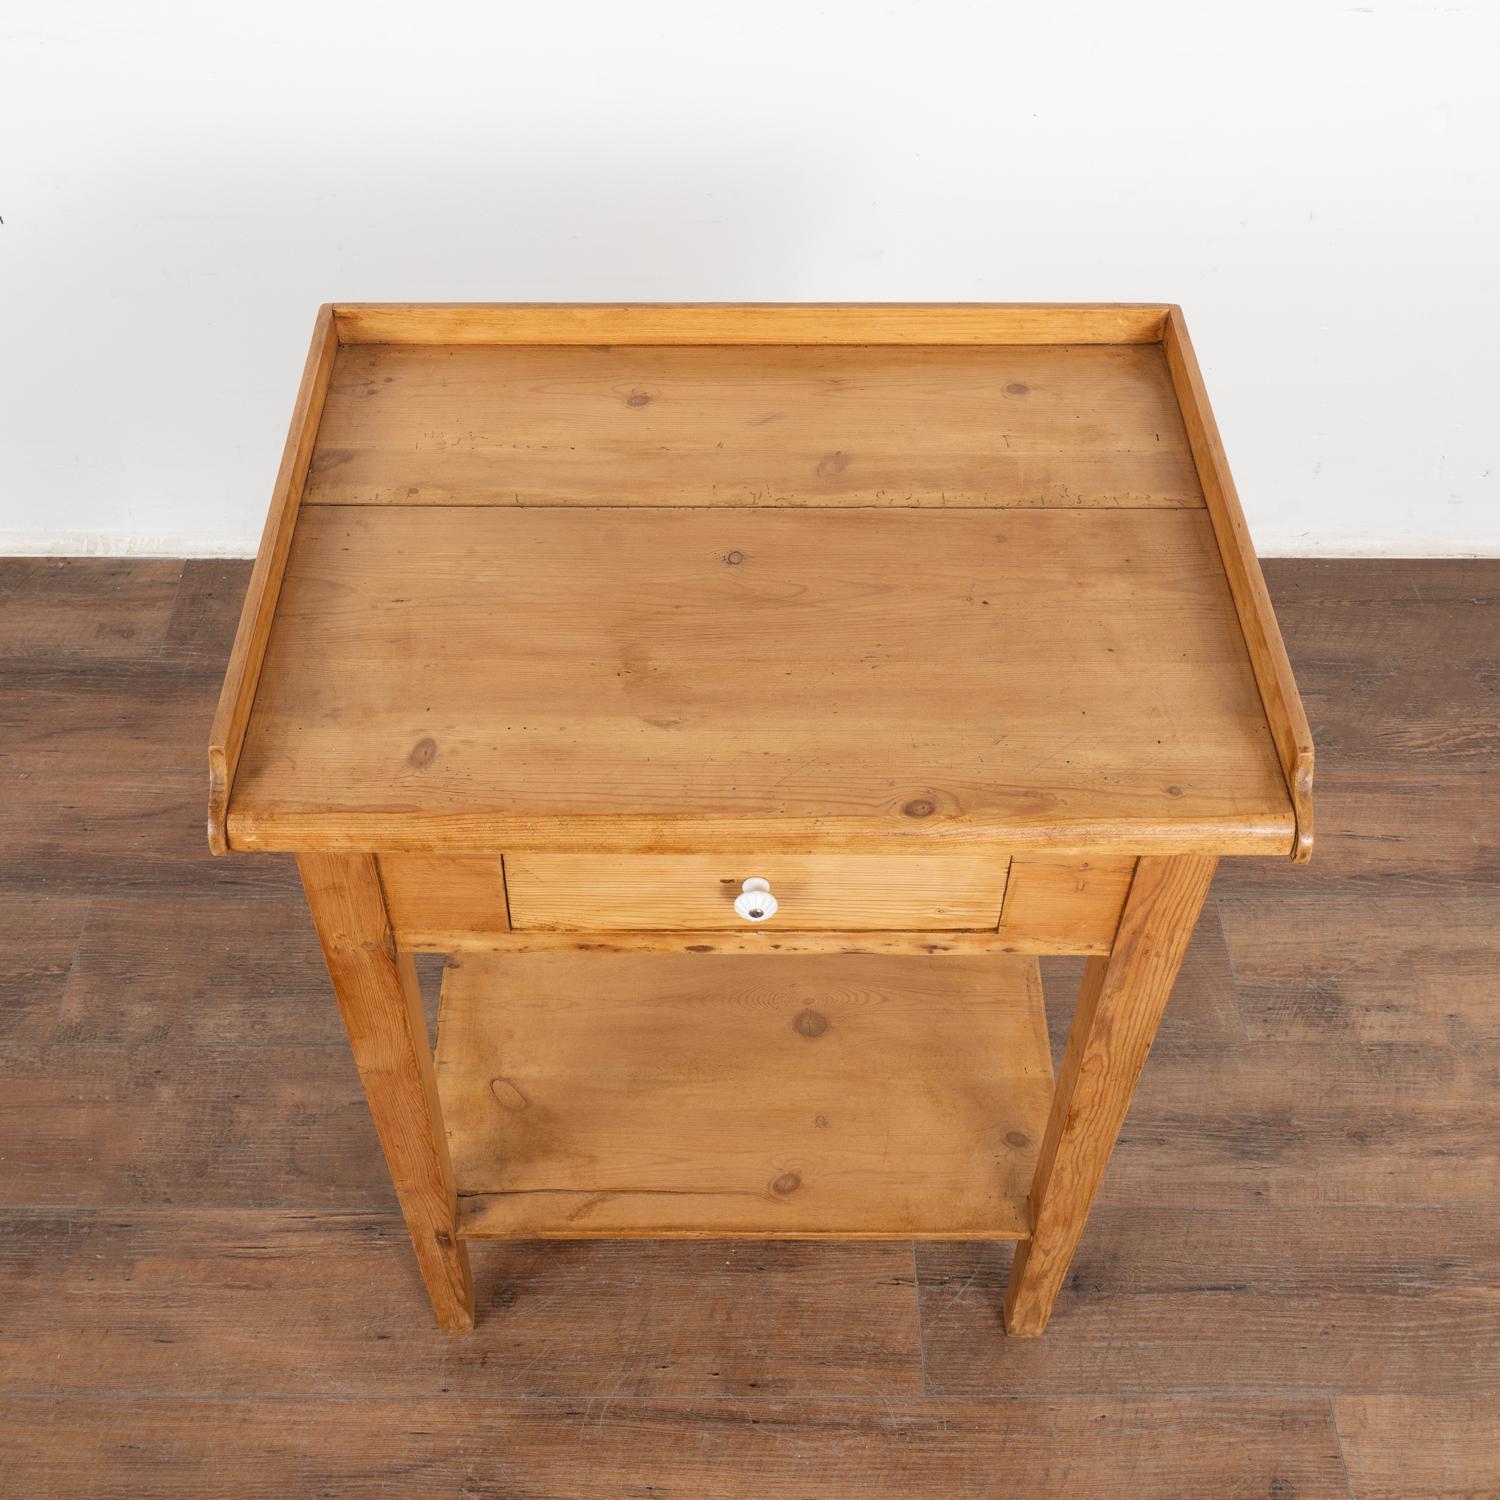 Danish Small Pine Side Table With Drawer, Denmark circa 1890